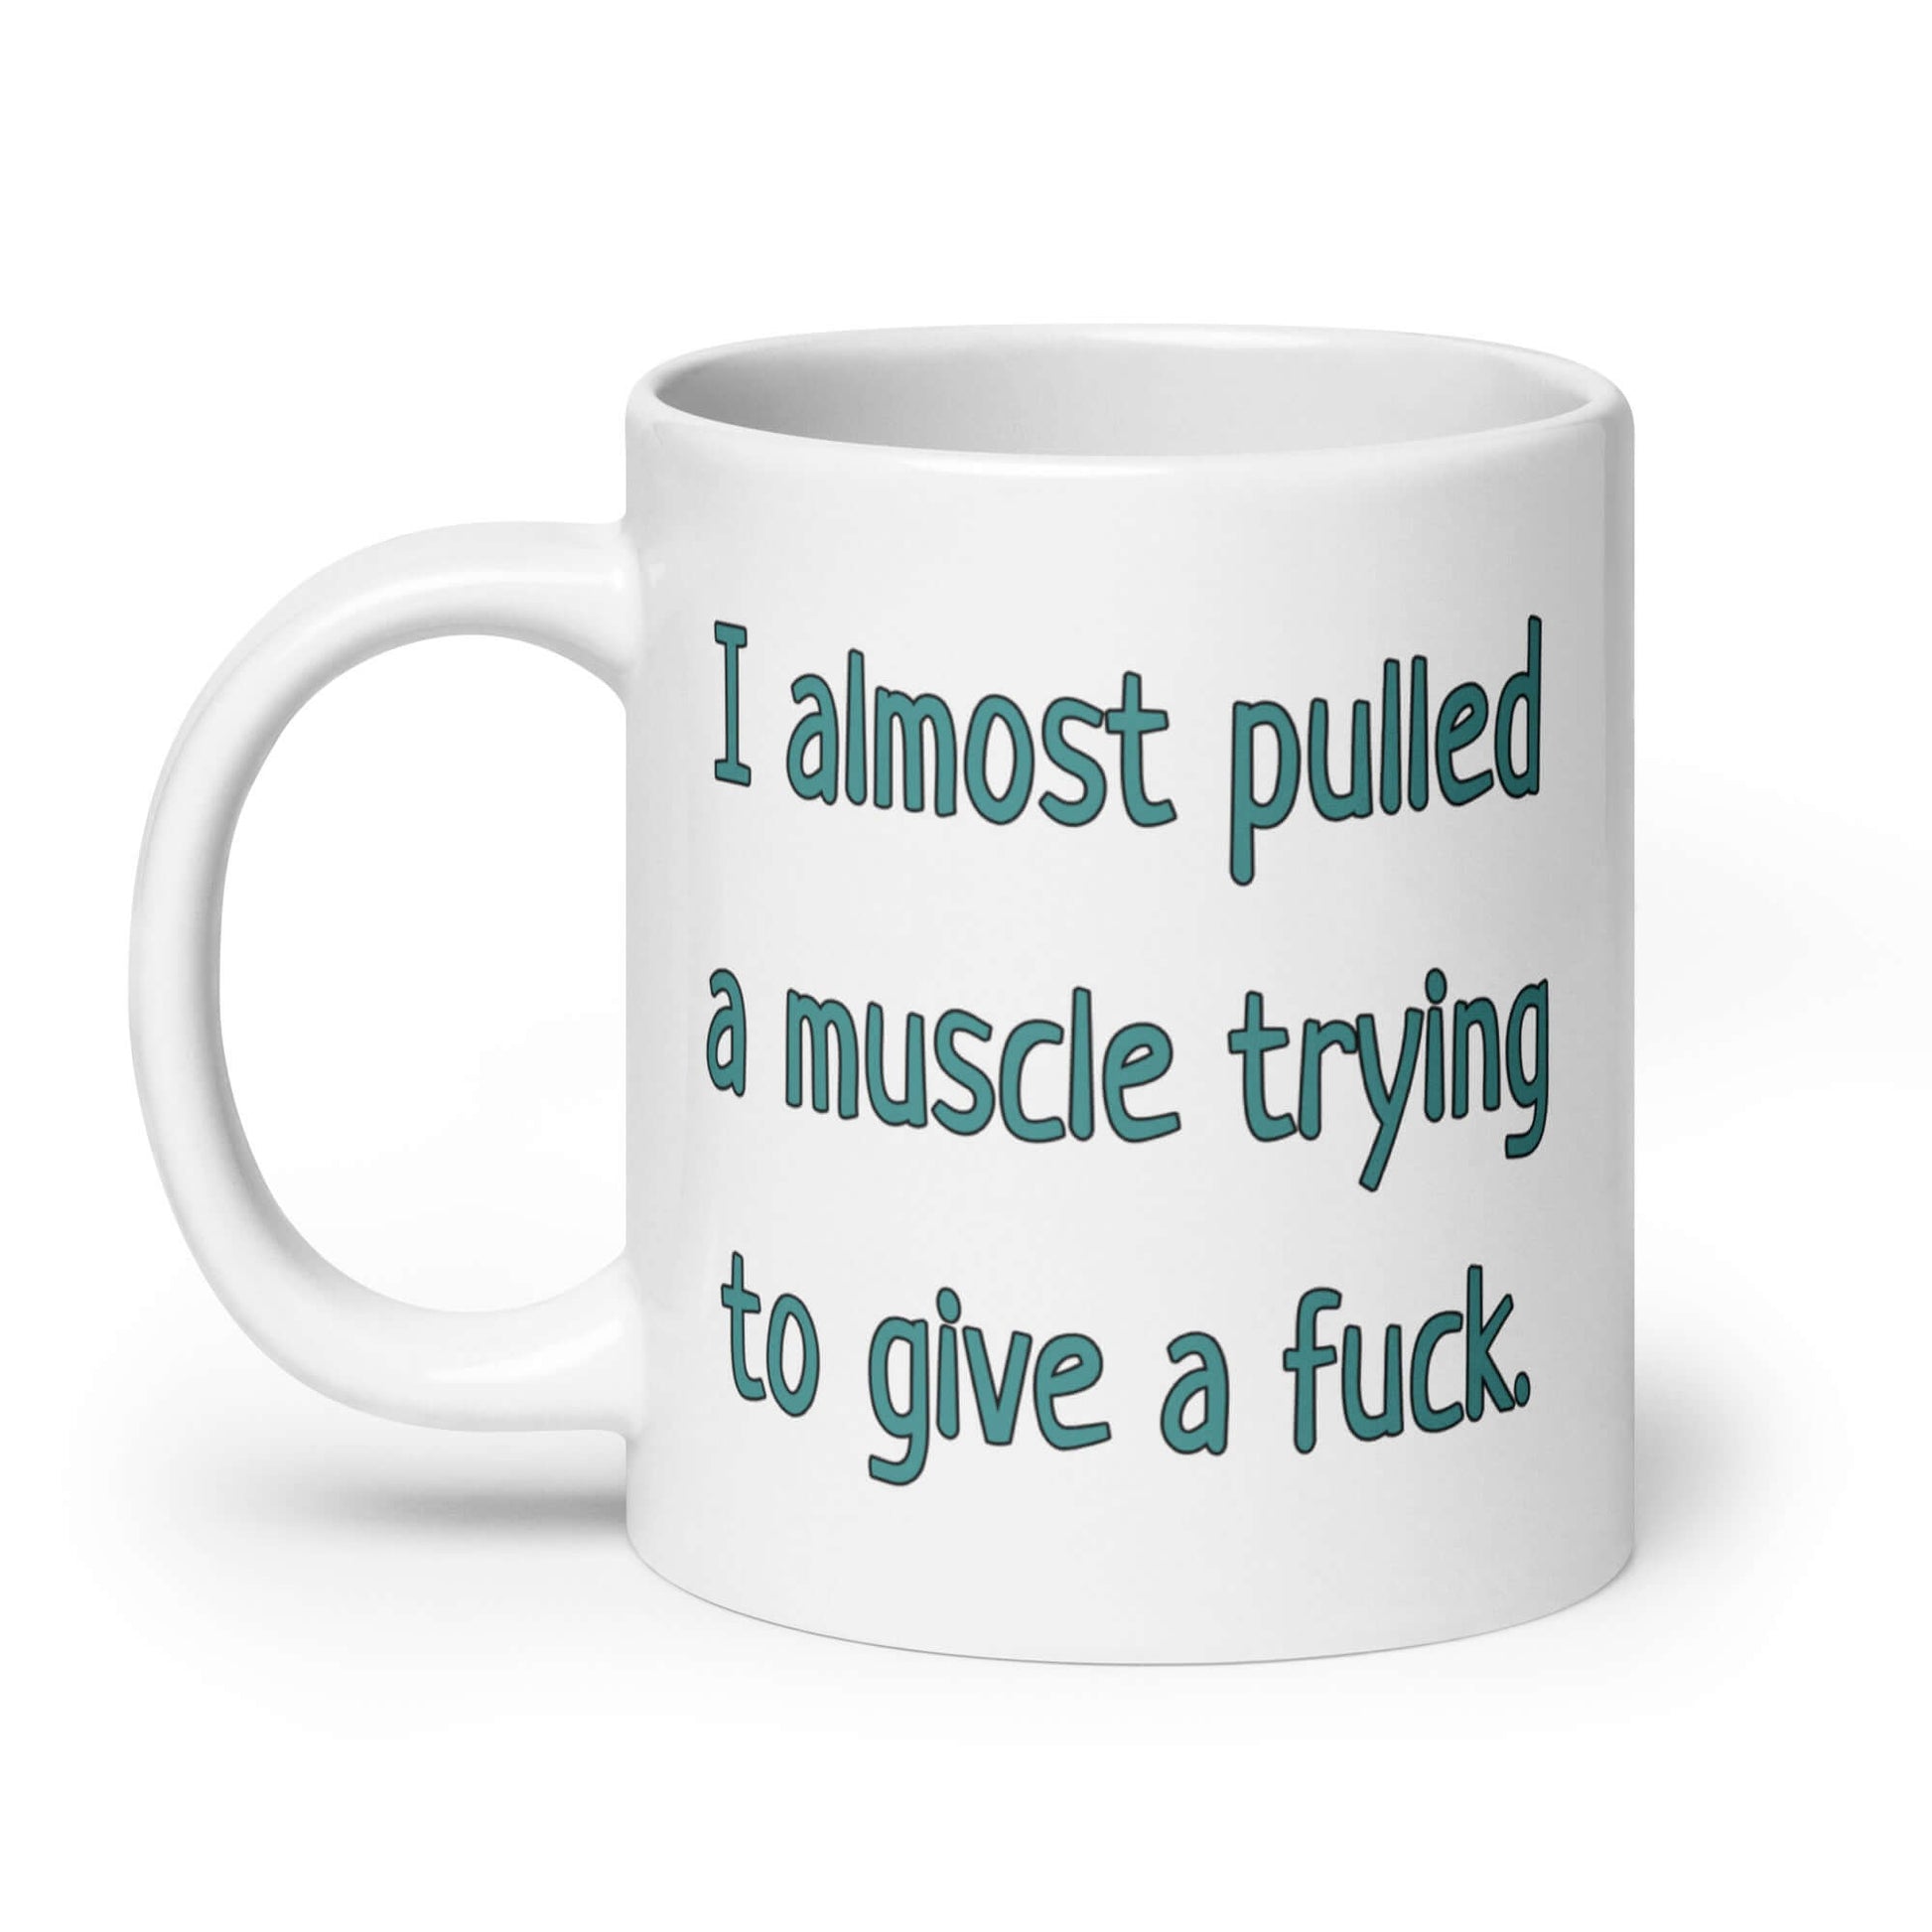 White ceramic coffee mug with the words I almost pulled a muscle trying to give a fuck printed on both sides.